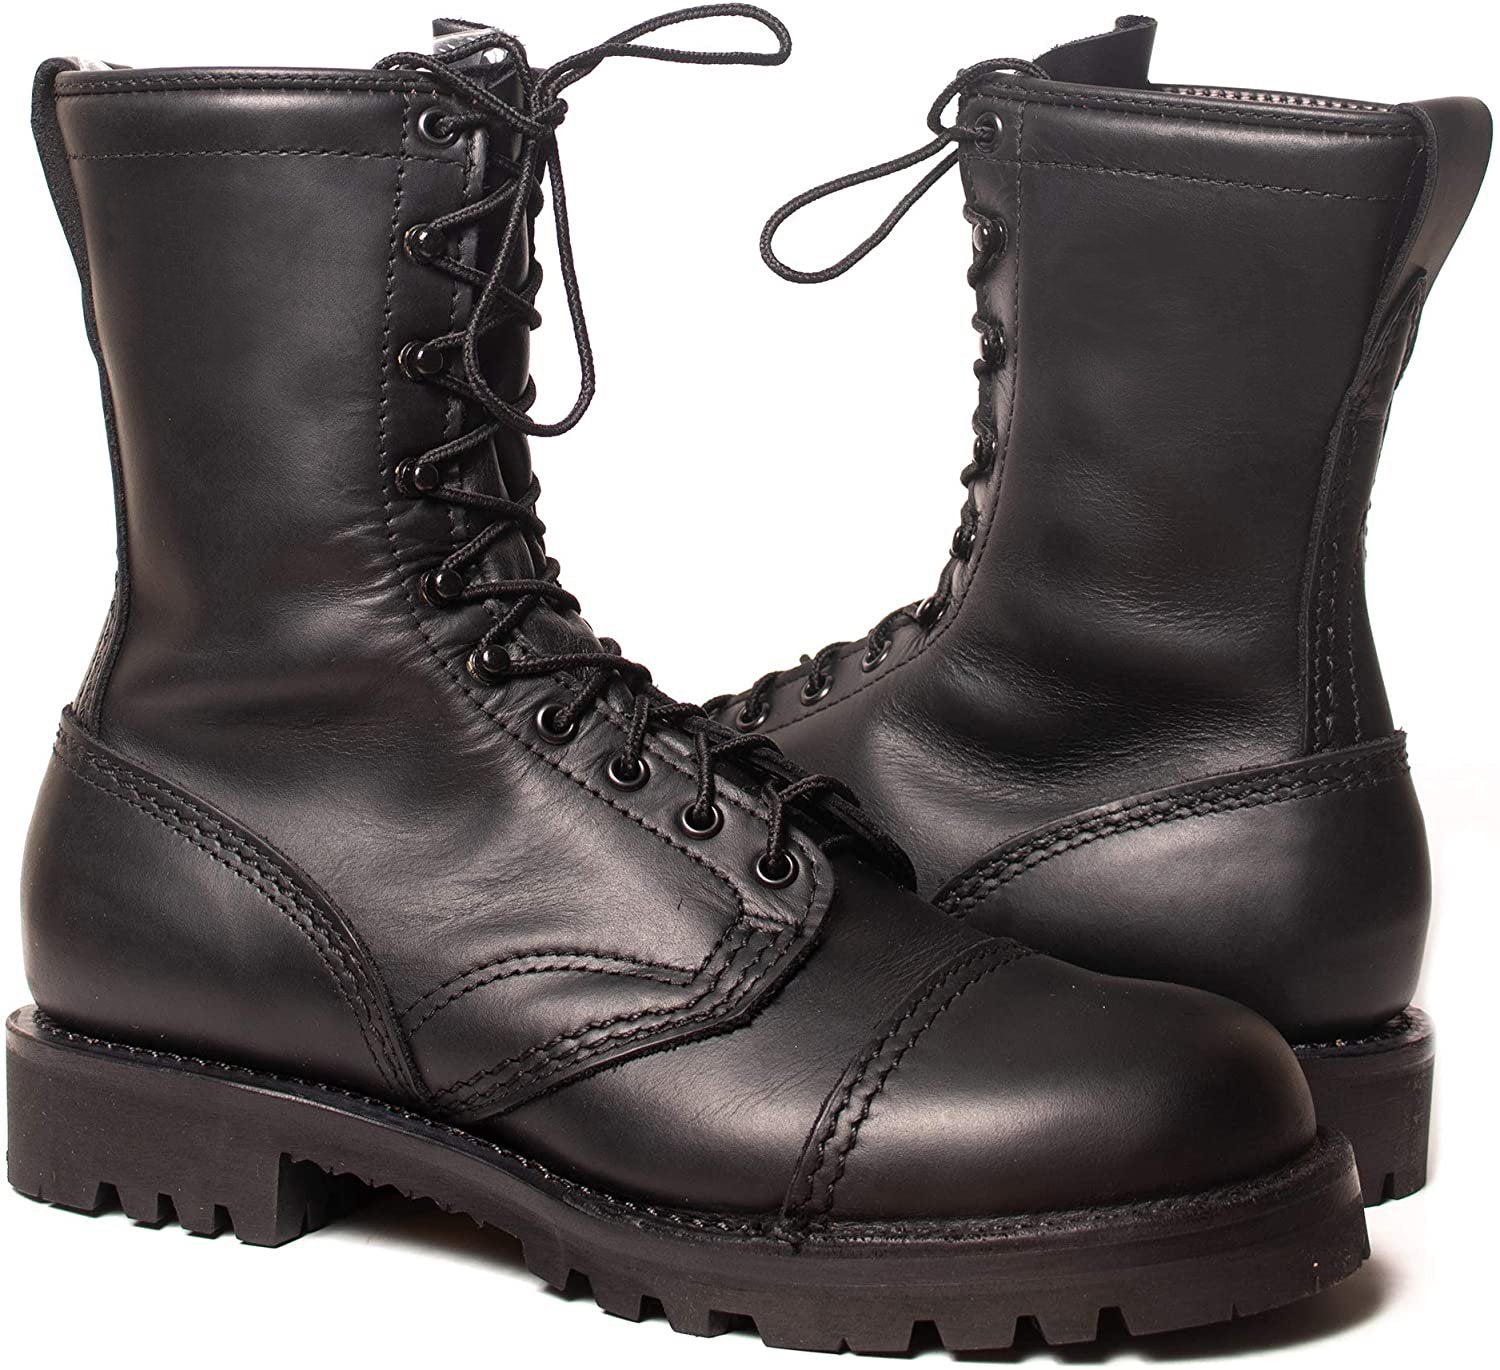 Leather Exclusive Combat Boots